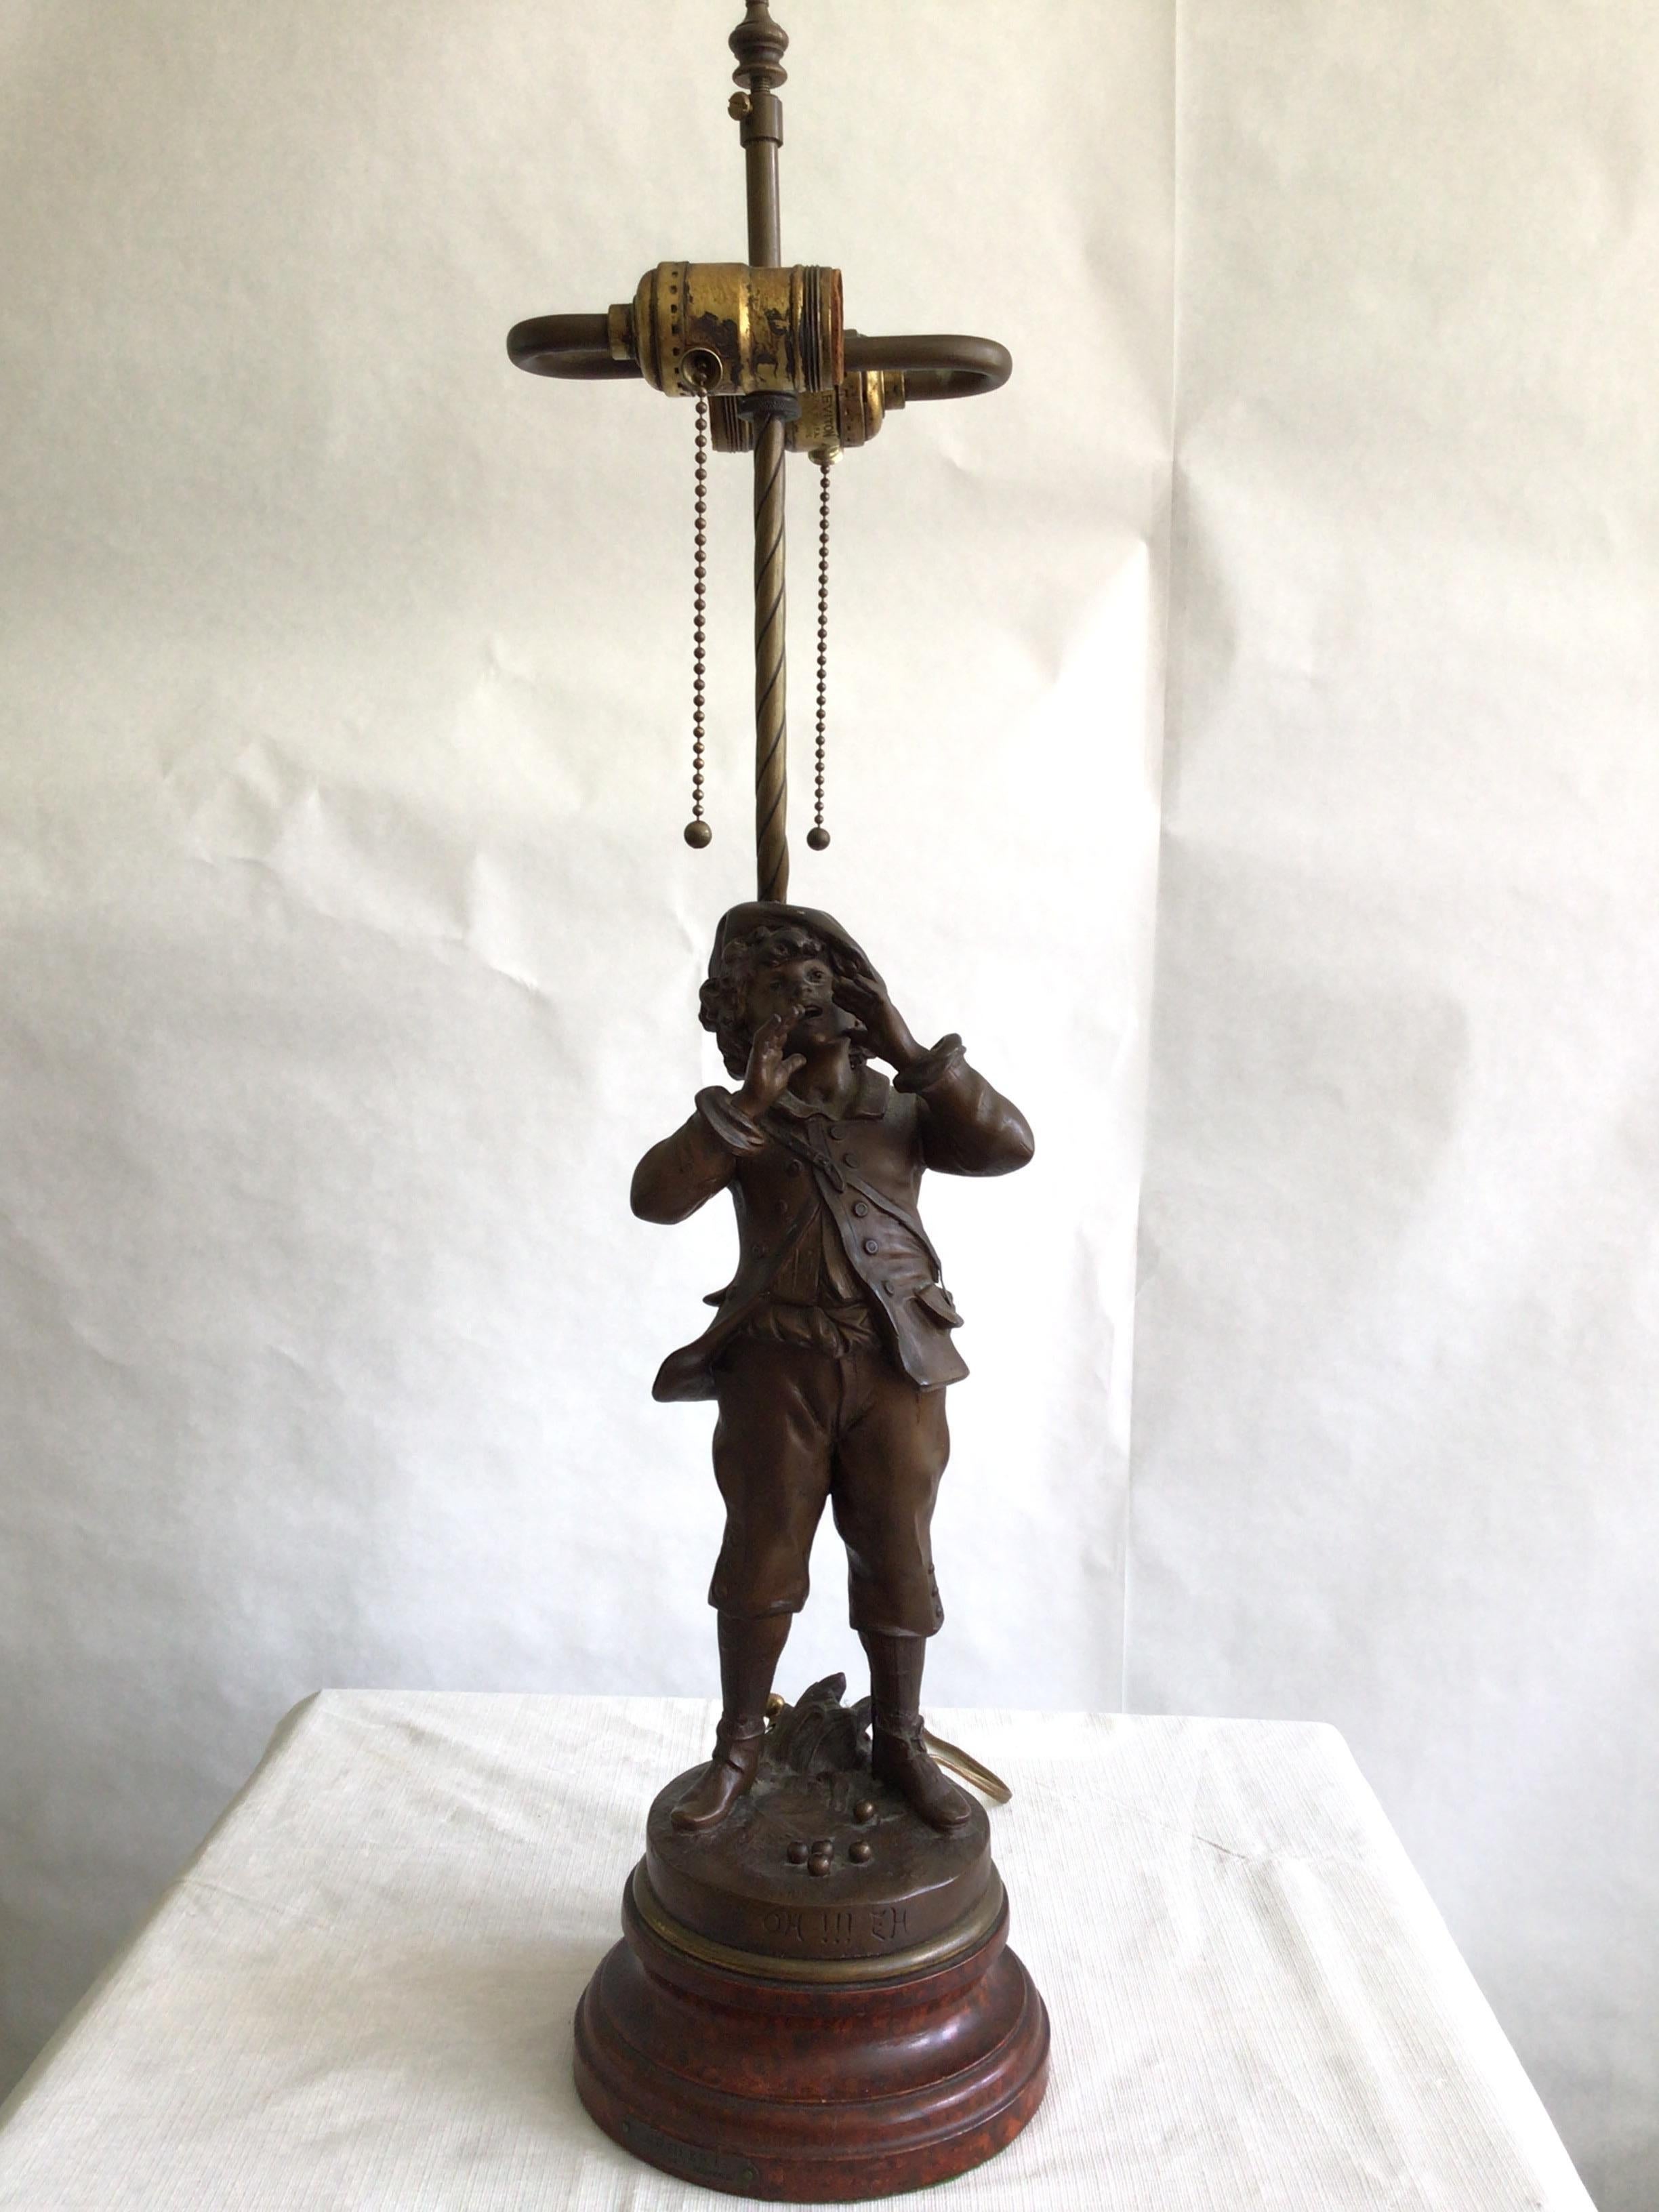 1950s Sculpture Table Lamp Of A Boy Bellowing
Made of Spelter or Pot Metal
Faux Tortoiseshell Painted Wood Base
OH !!! EH! 
Par L. Moreau 
Height To Top Of Socket
Needs Rewiring